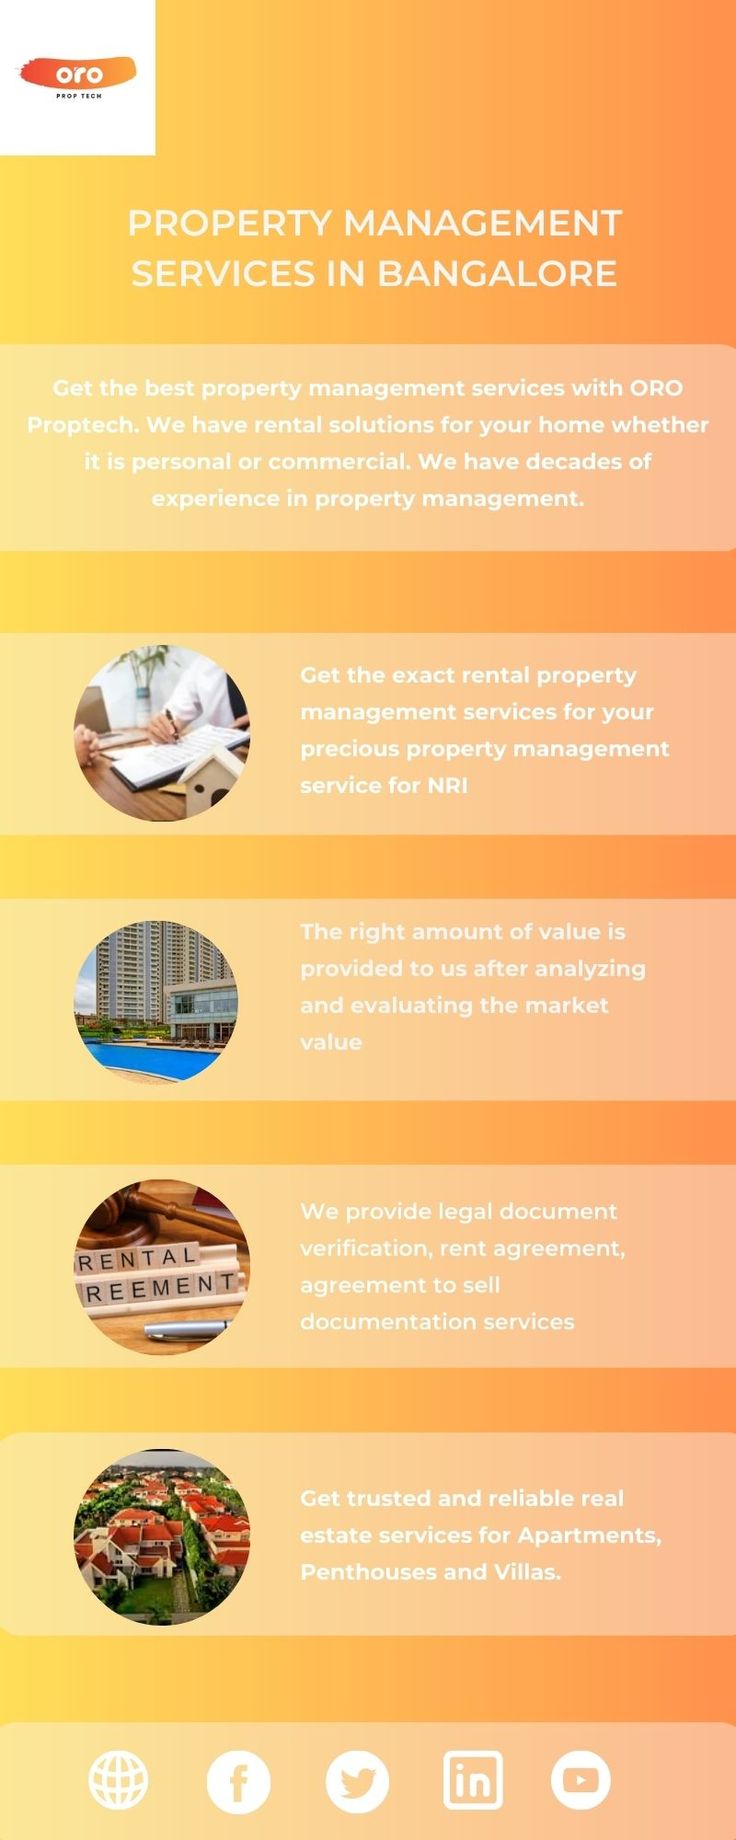 Pin on NRI Property Management Services By ORO